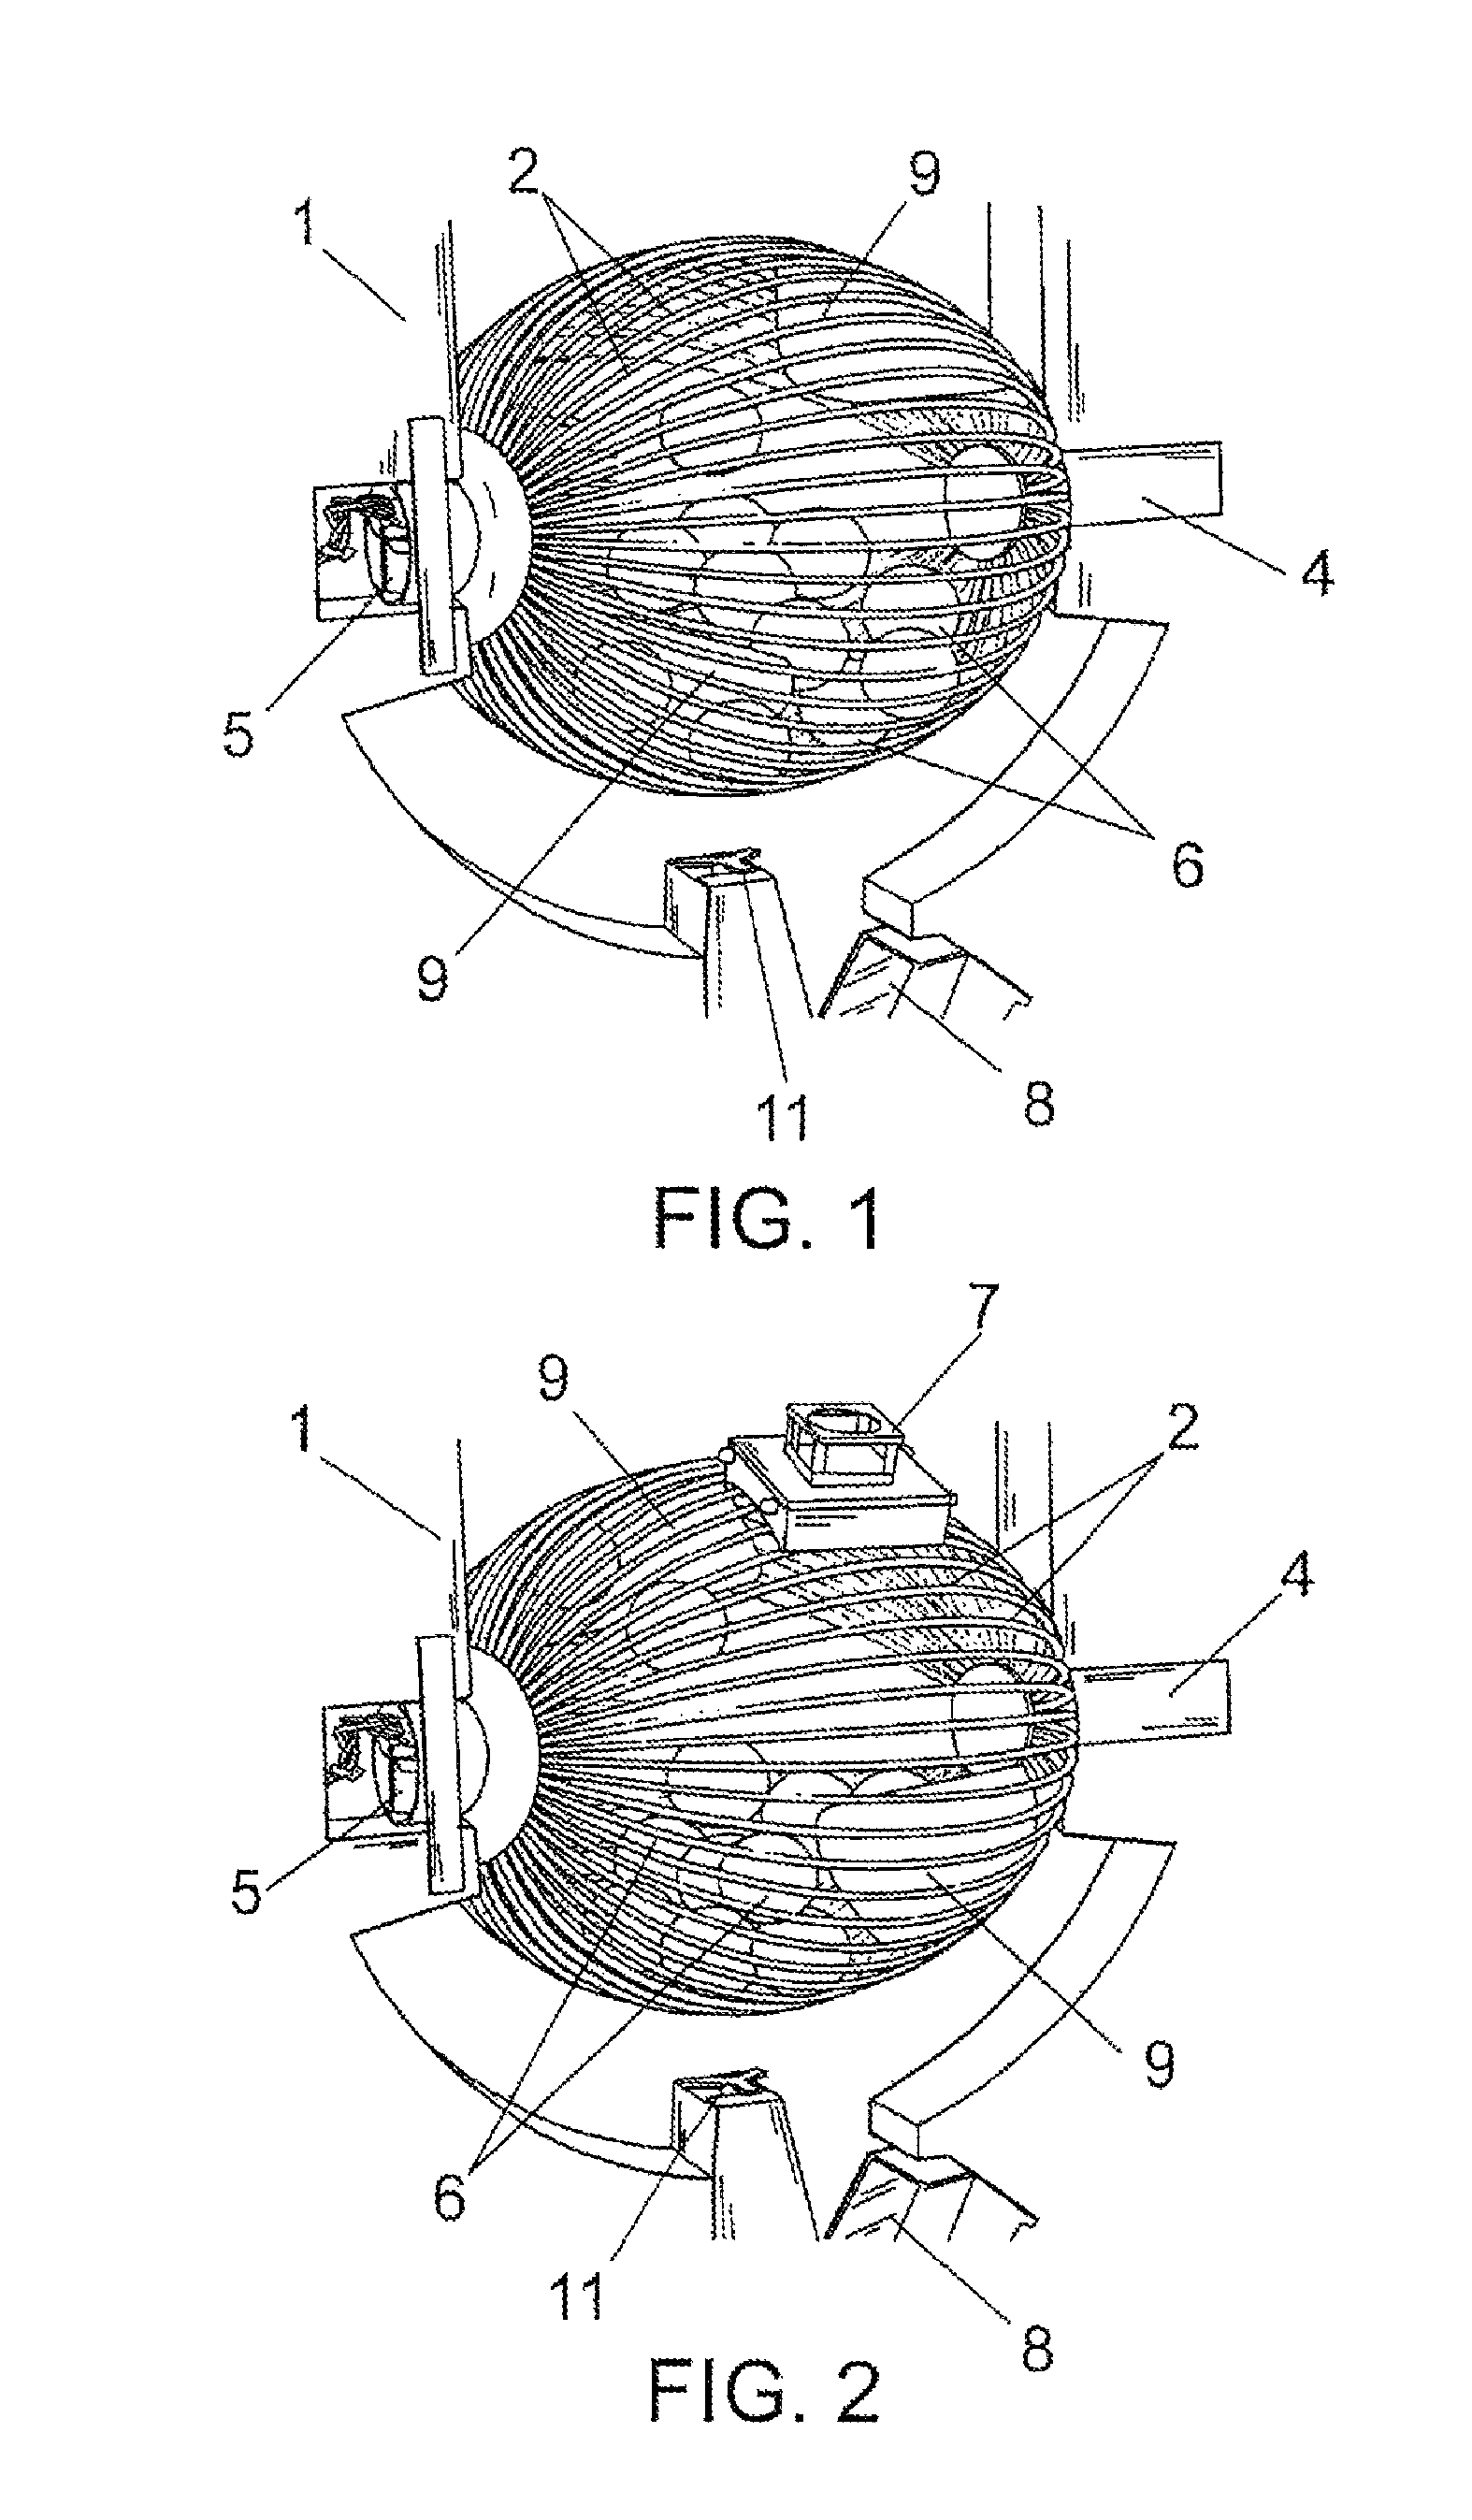 Ball whirling device for recreational games of chance